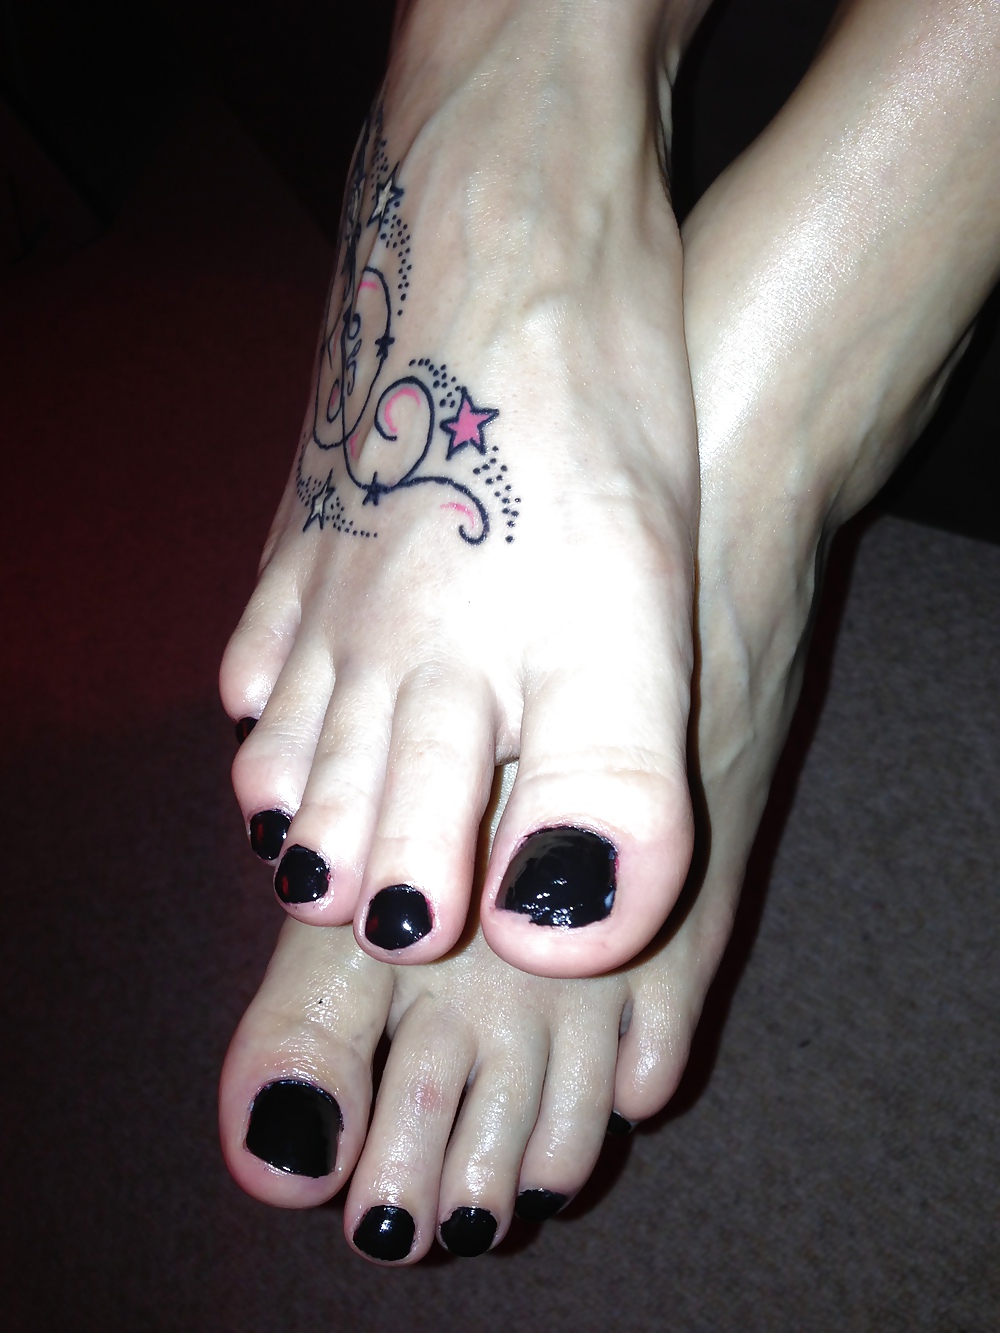 New foot pics for fans of my gf,s feet #16776332